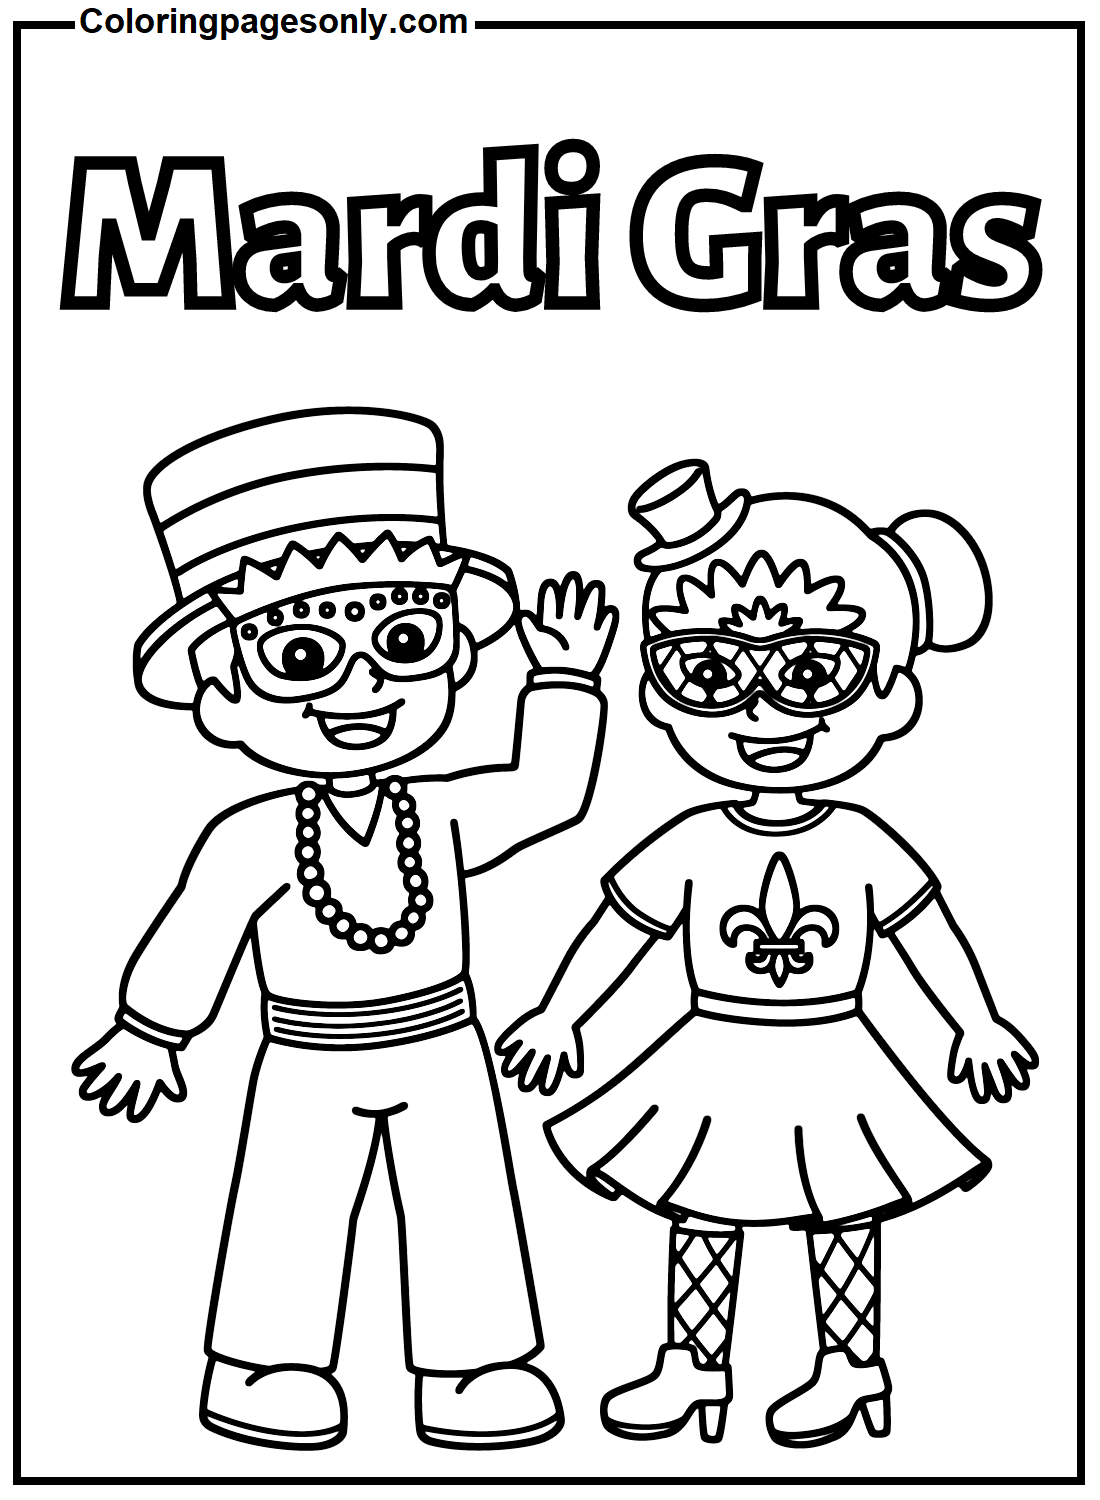 Boy and Girl in Mardi Gras Coloring Page